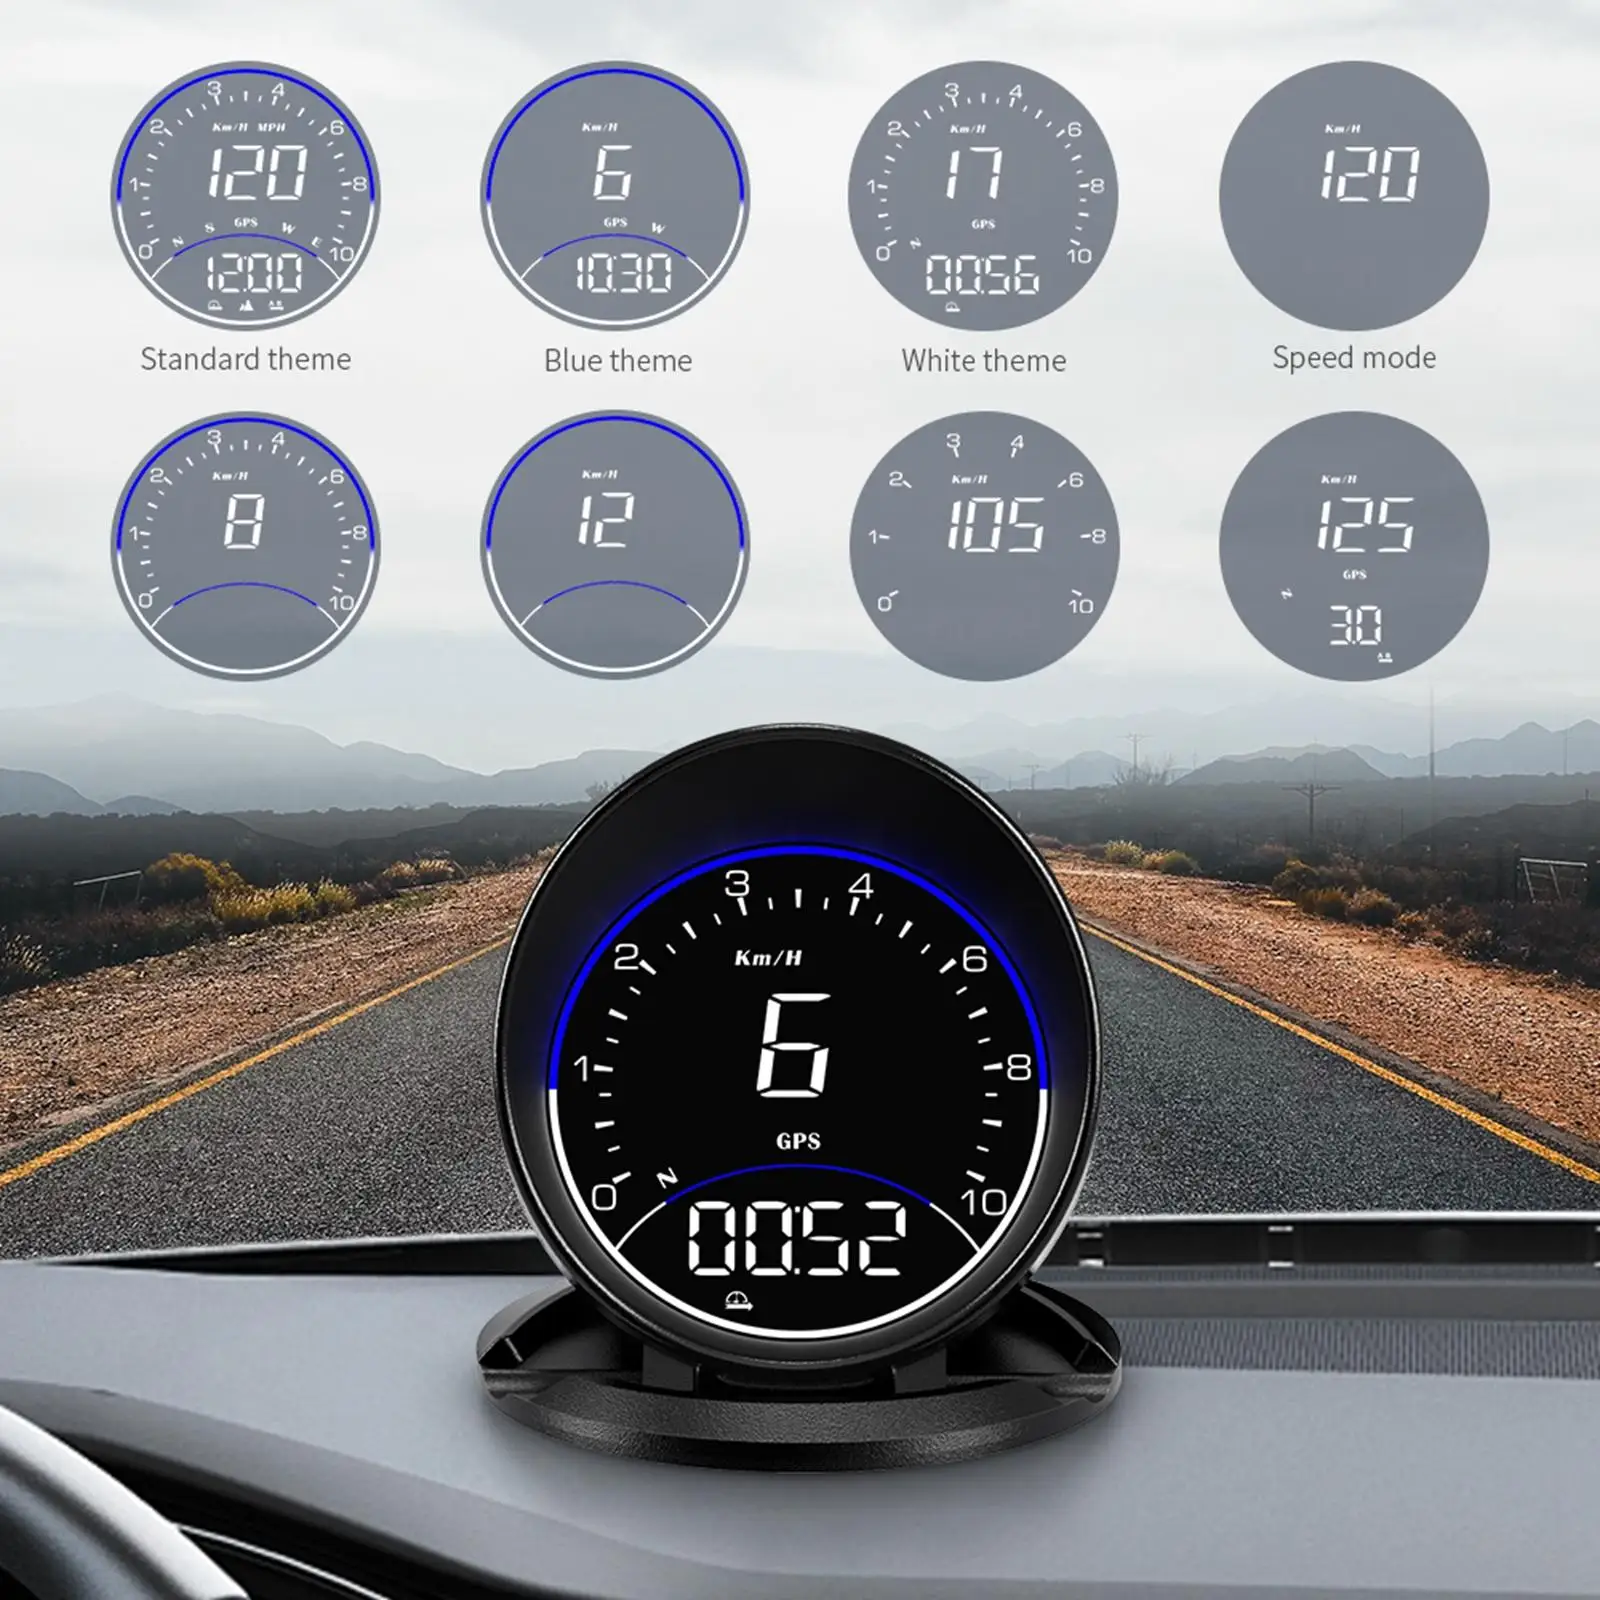 Car HUD Display Display with Compass Sturdy Easily Install